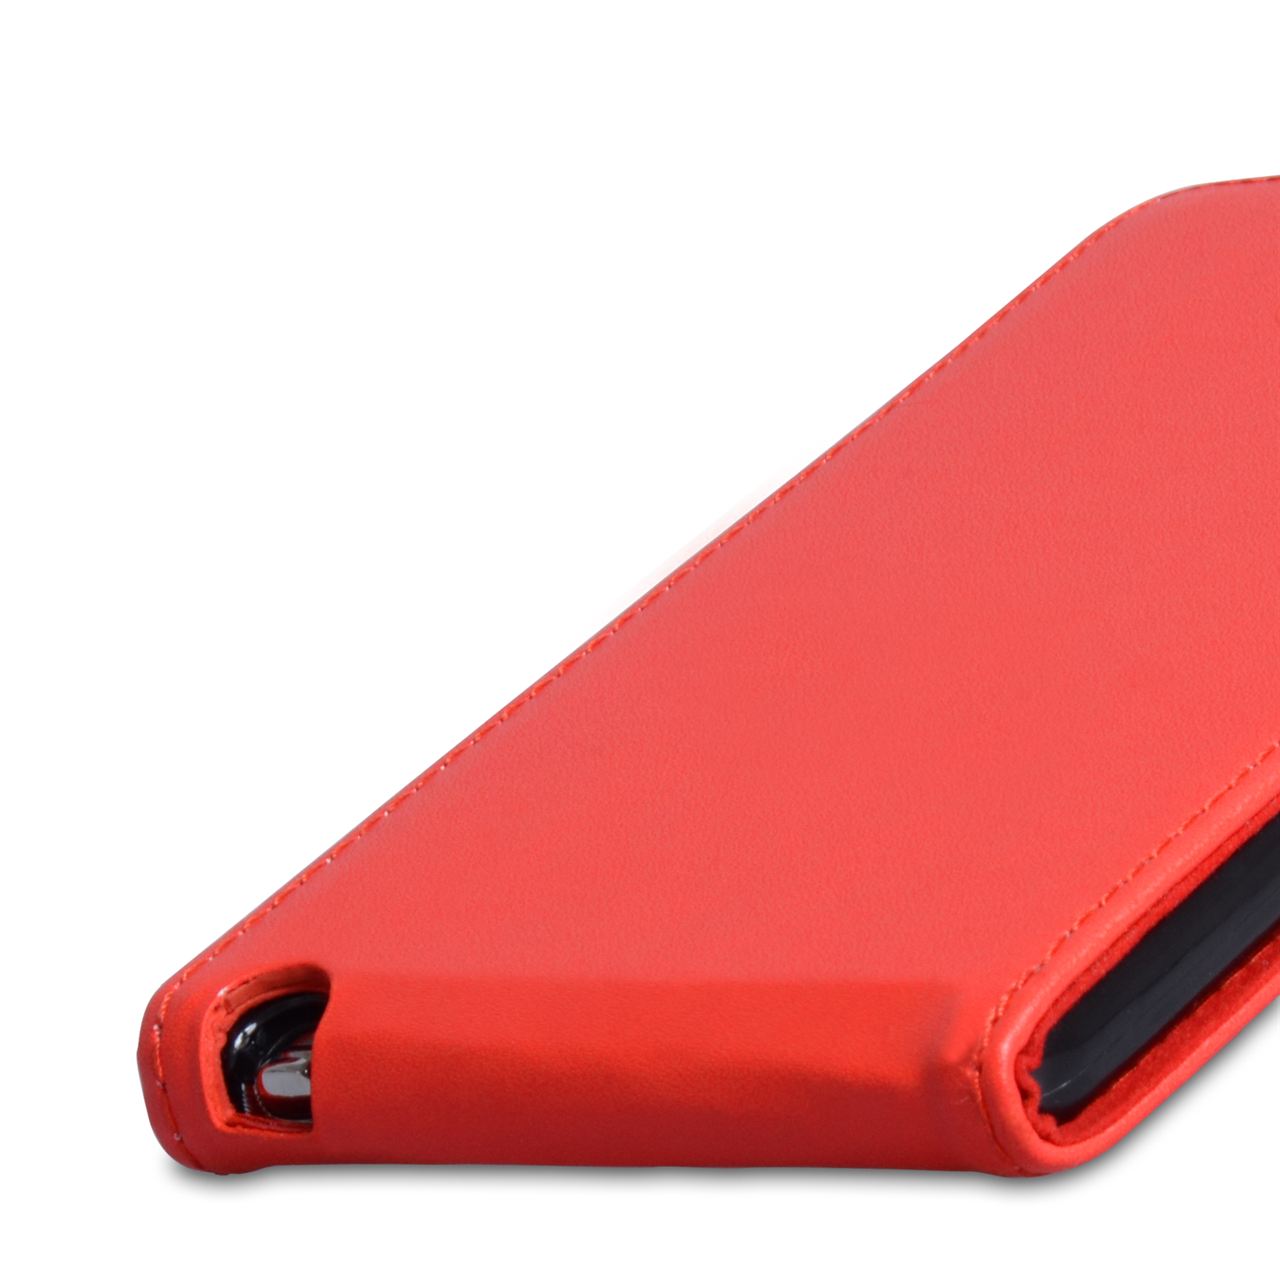 YouSave Samsung Galaxy Note 3 Leather Effect Flip Case - Red 